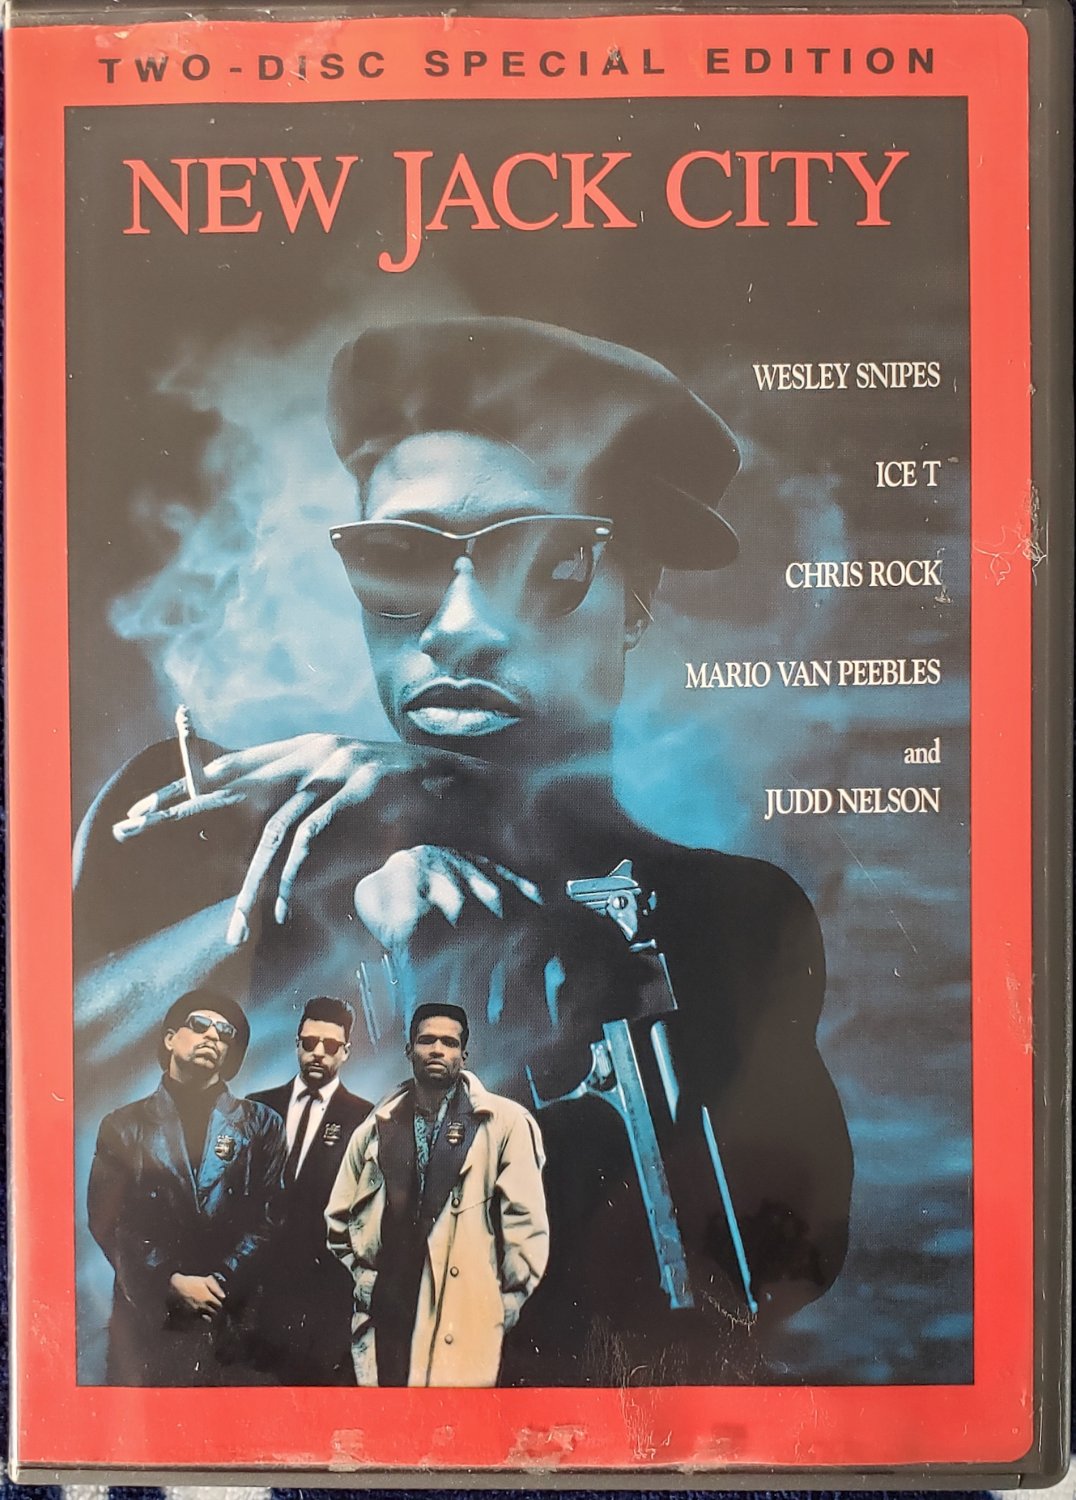 NEW JACK CITY 2-DISC SPECIAL EDITION DVD 1991 WESLEY SNIPES ICE T CHRIS ROCK